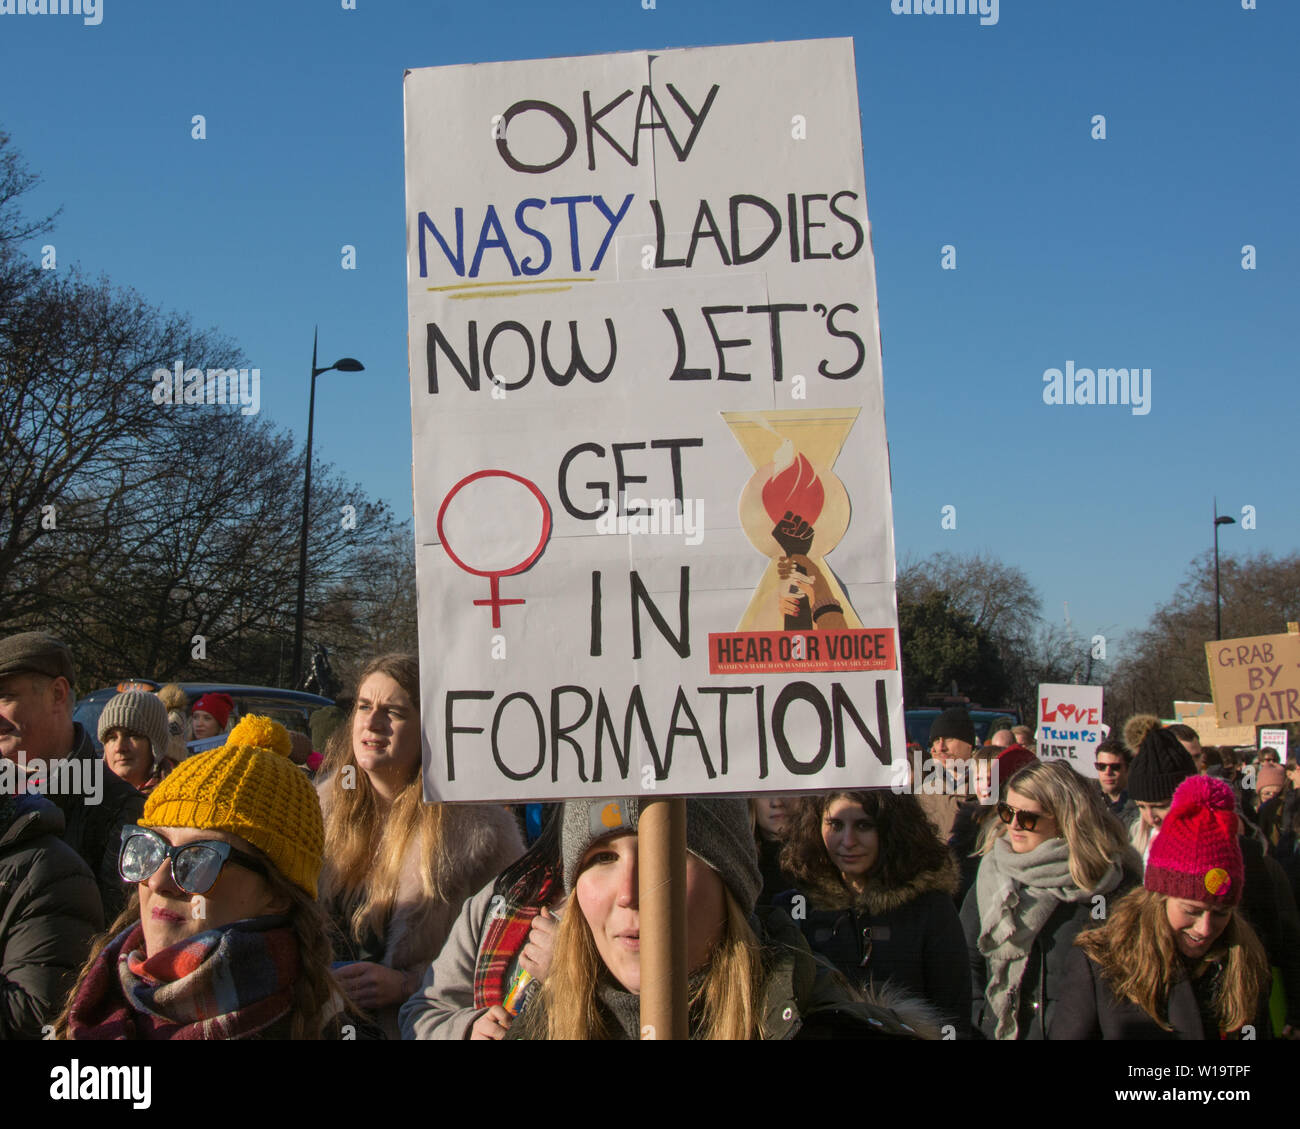 Women's March, London, UK, 21st January 2017. A female protester carries a placard paraphrasing a line in the Beyonce song "Formation" during a protest the day after the inauguration of President Donald Trump. In full it reads "Okay nasty ladies now let's get in formation". Up to 10,000 took part in London as women worldwide marked the day by marching in an act of international solidarity. Stock Photo